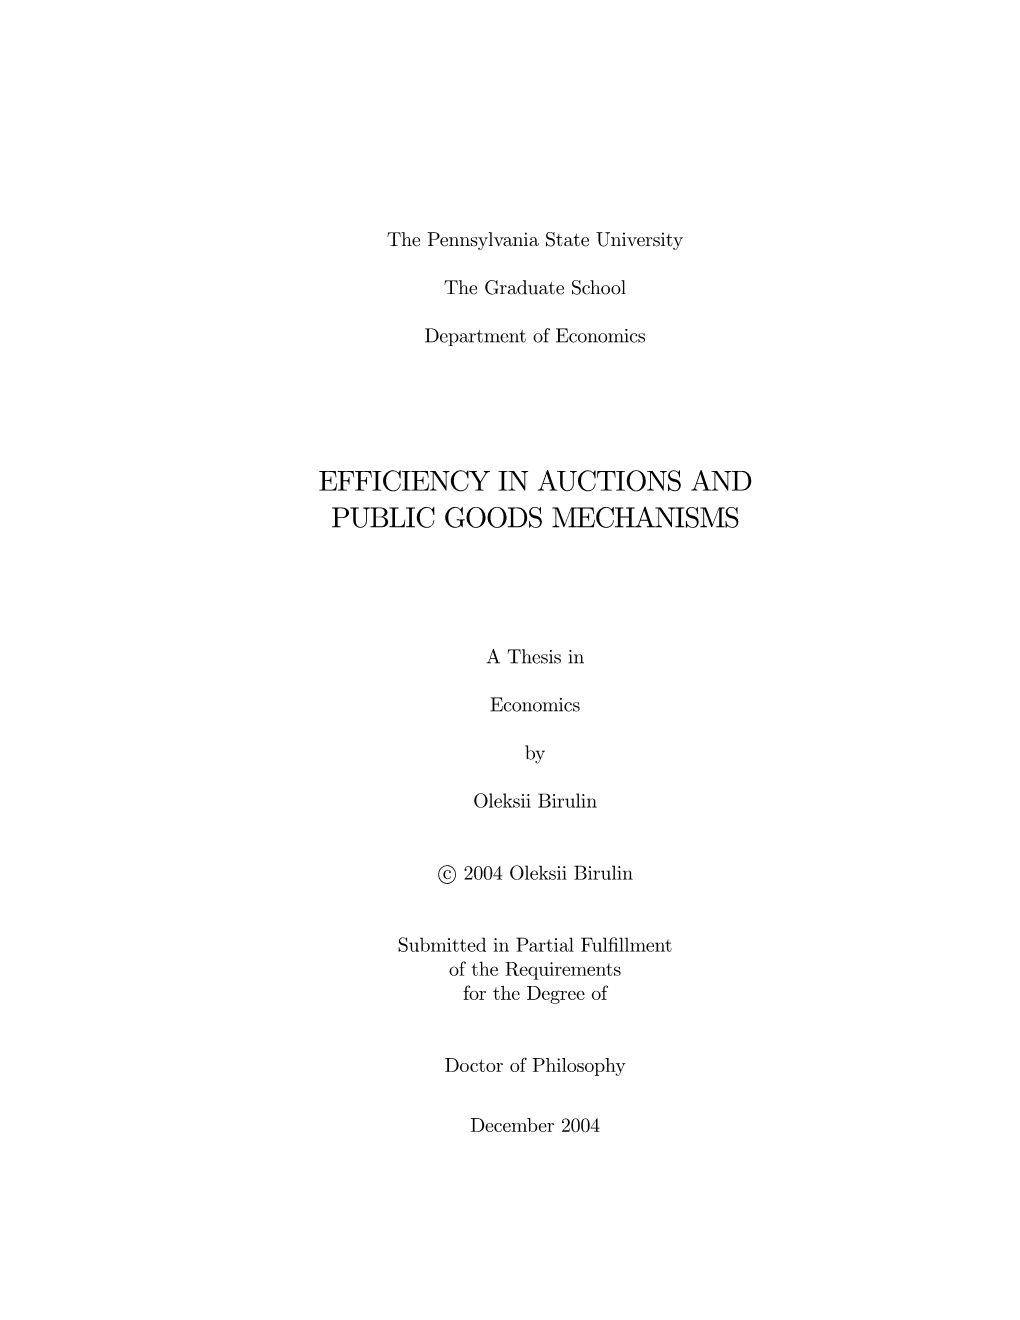 Efficiency in Auctions and Public Goods Mechanisms